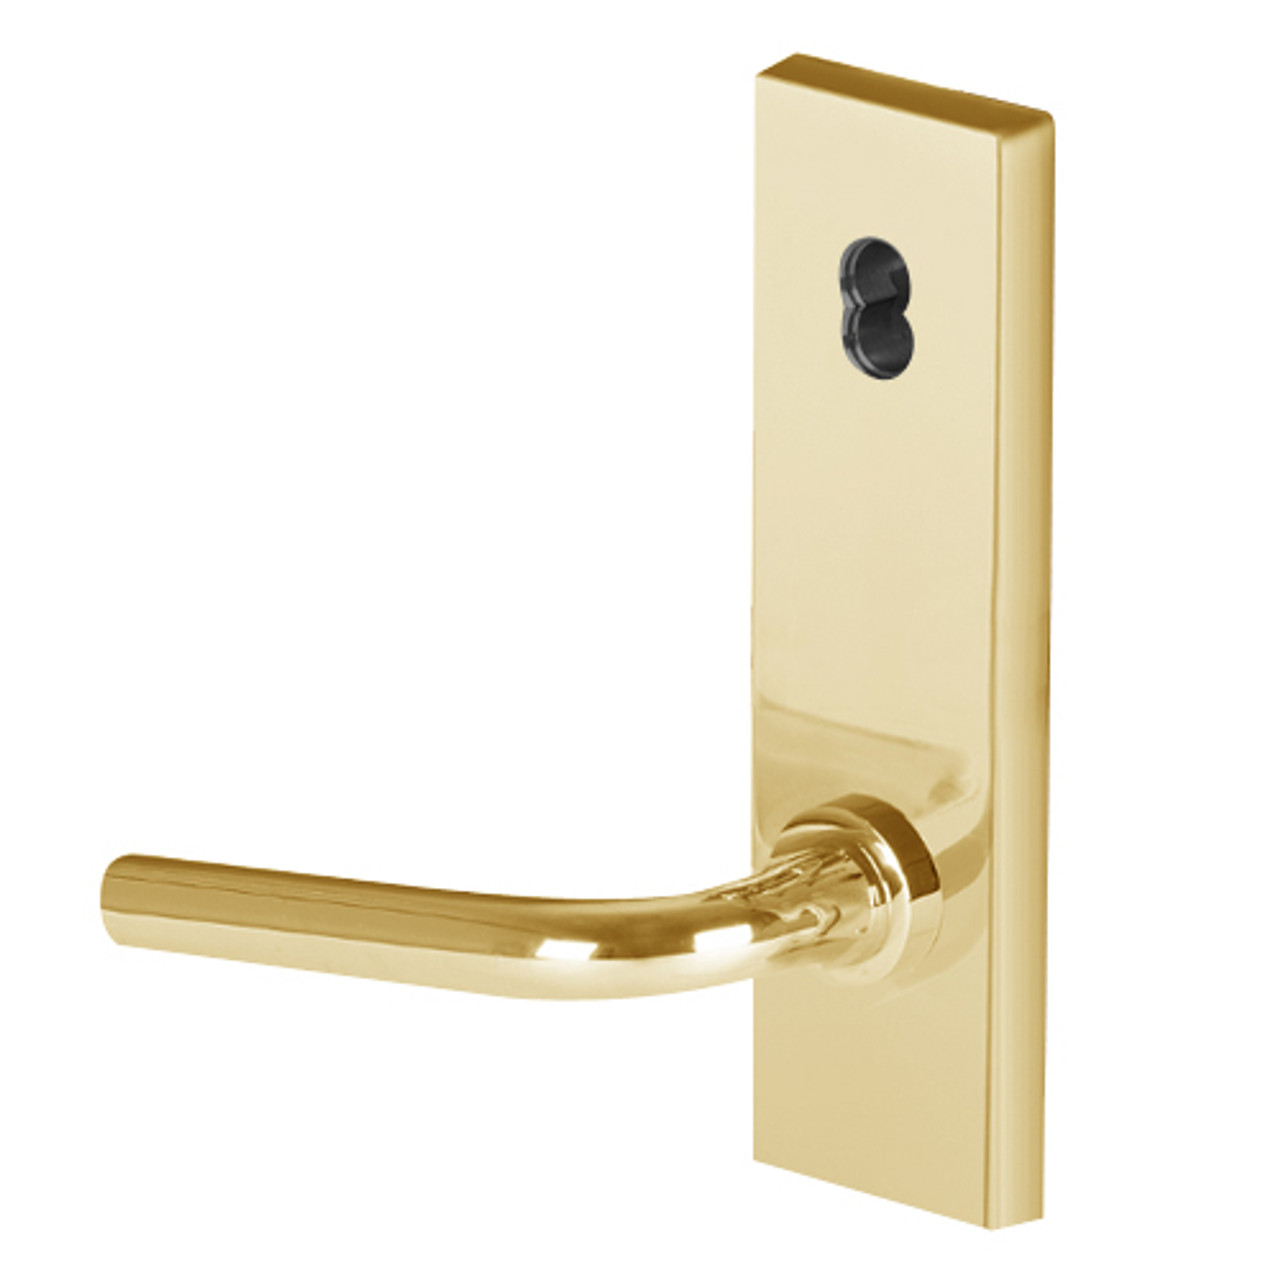 45HW7TWEL12N605 Best 40HW series Double Key Deadbolt Fail Safe Electromechanical Mortise Lever Lock with Solid Tube w/ No Return Style in Bright Brass